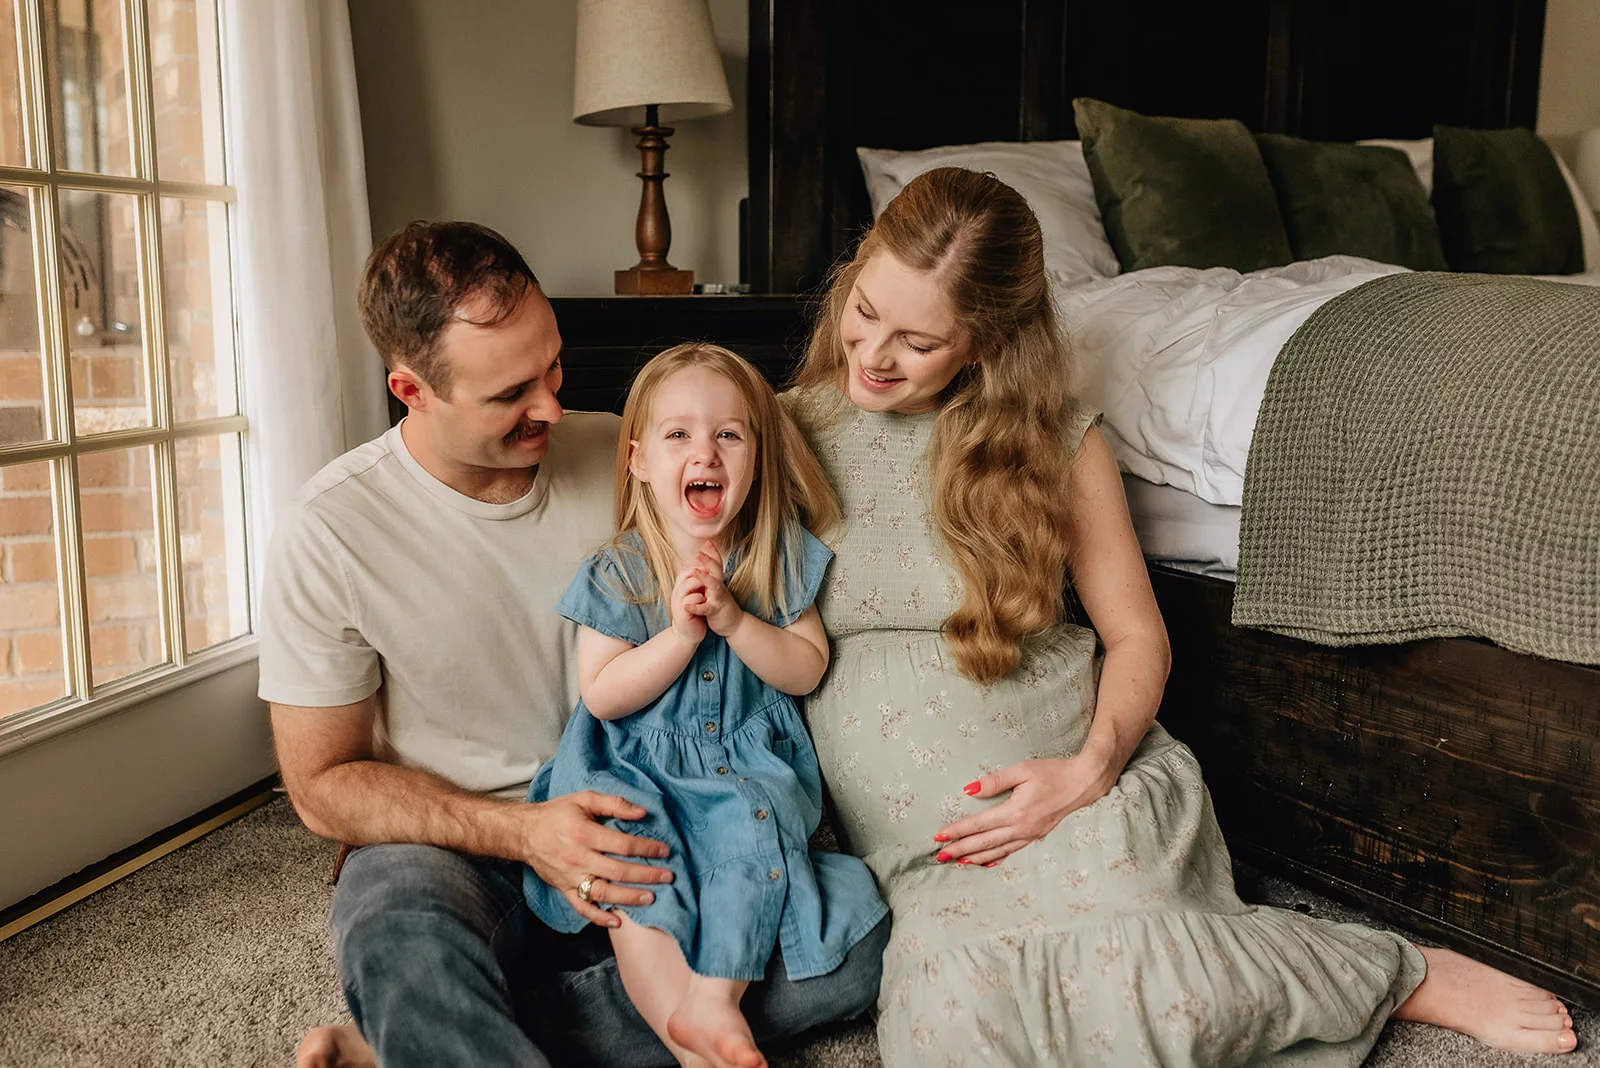 A happy toddler girl claps while sitting in the lap of dad and her pregnant mother